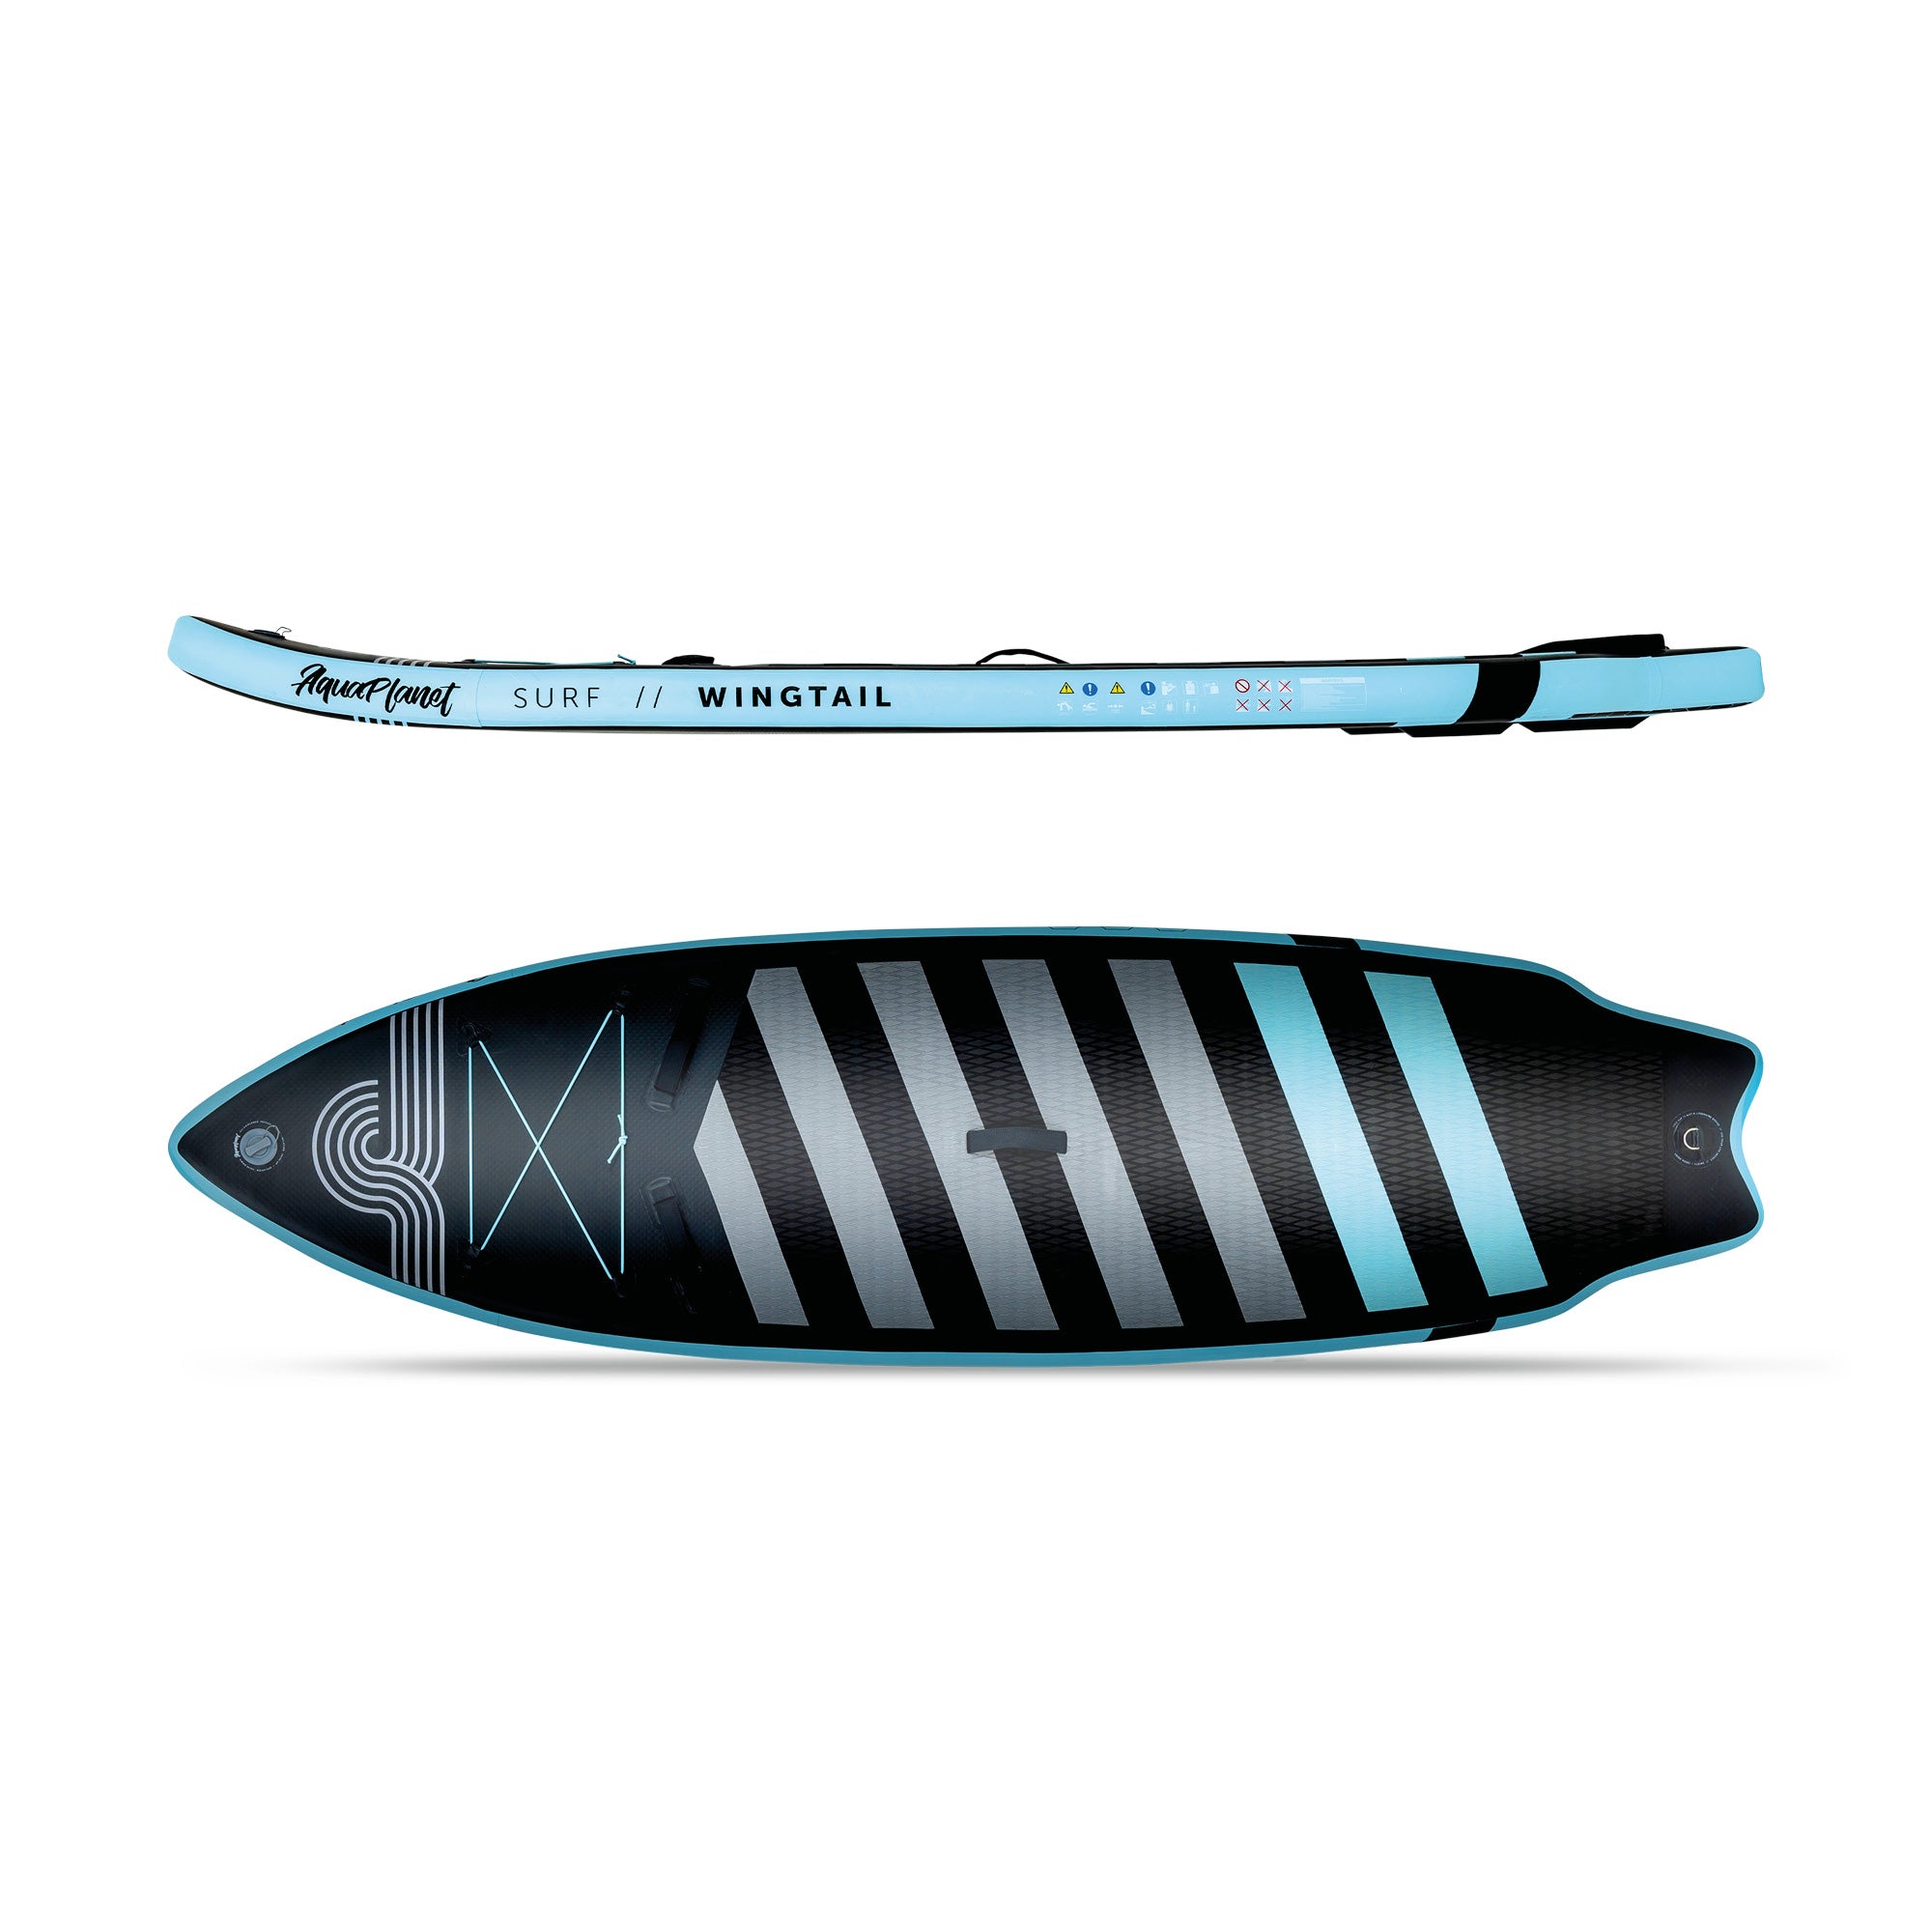 Top View and Side View of the Aquaplanet Wingtail 9' iSUP Inflatable Stand Up Paddleboard Set